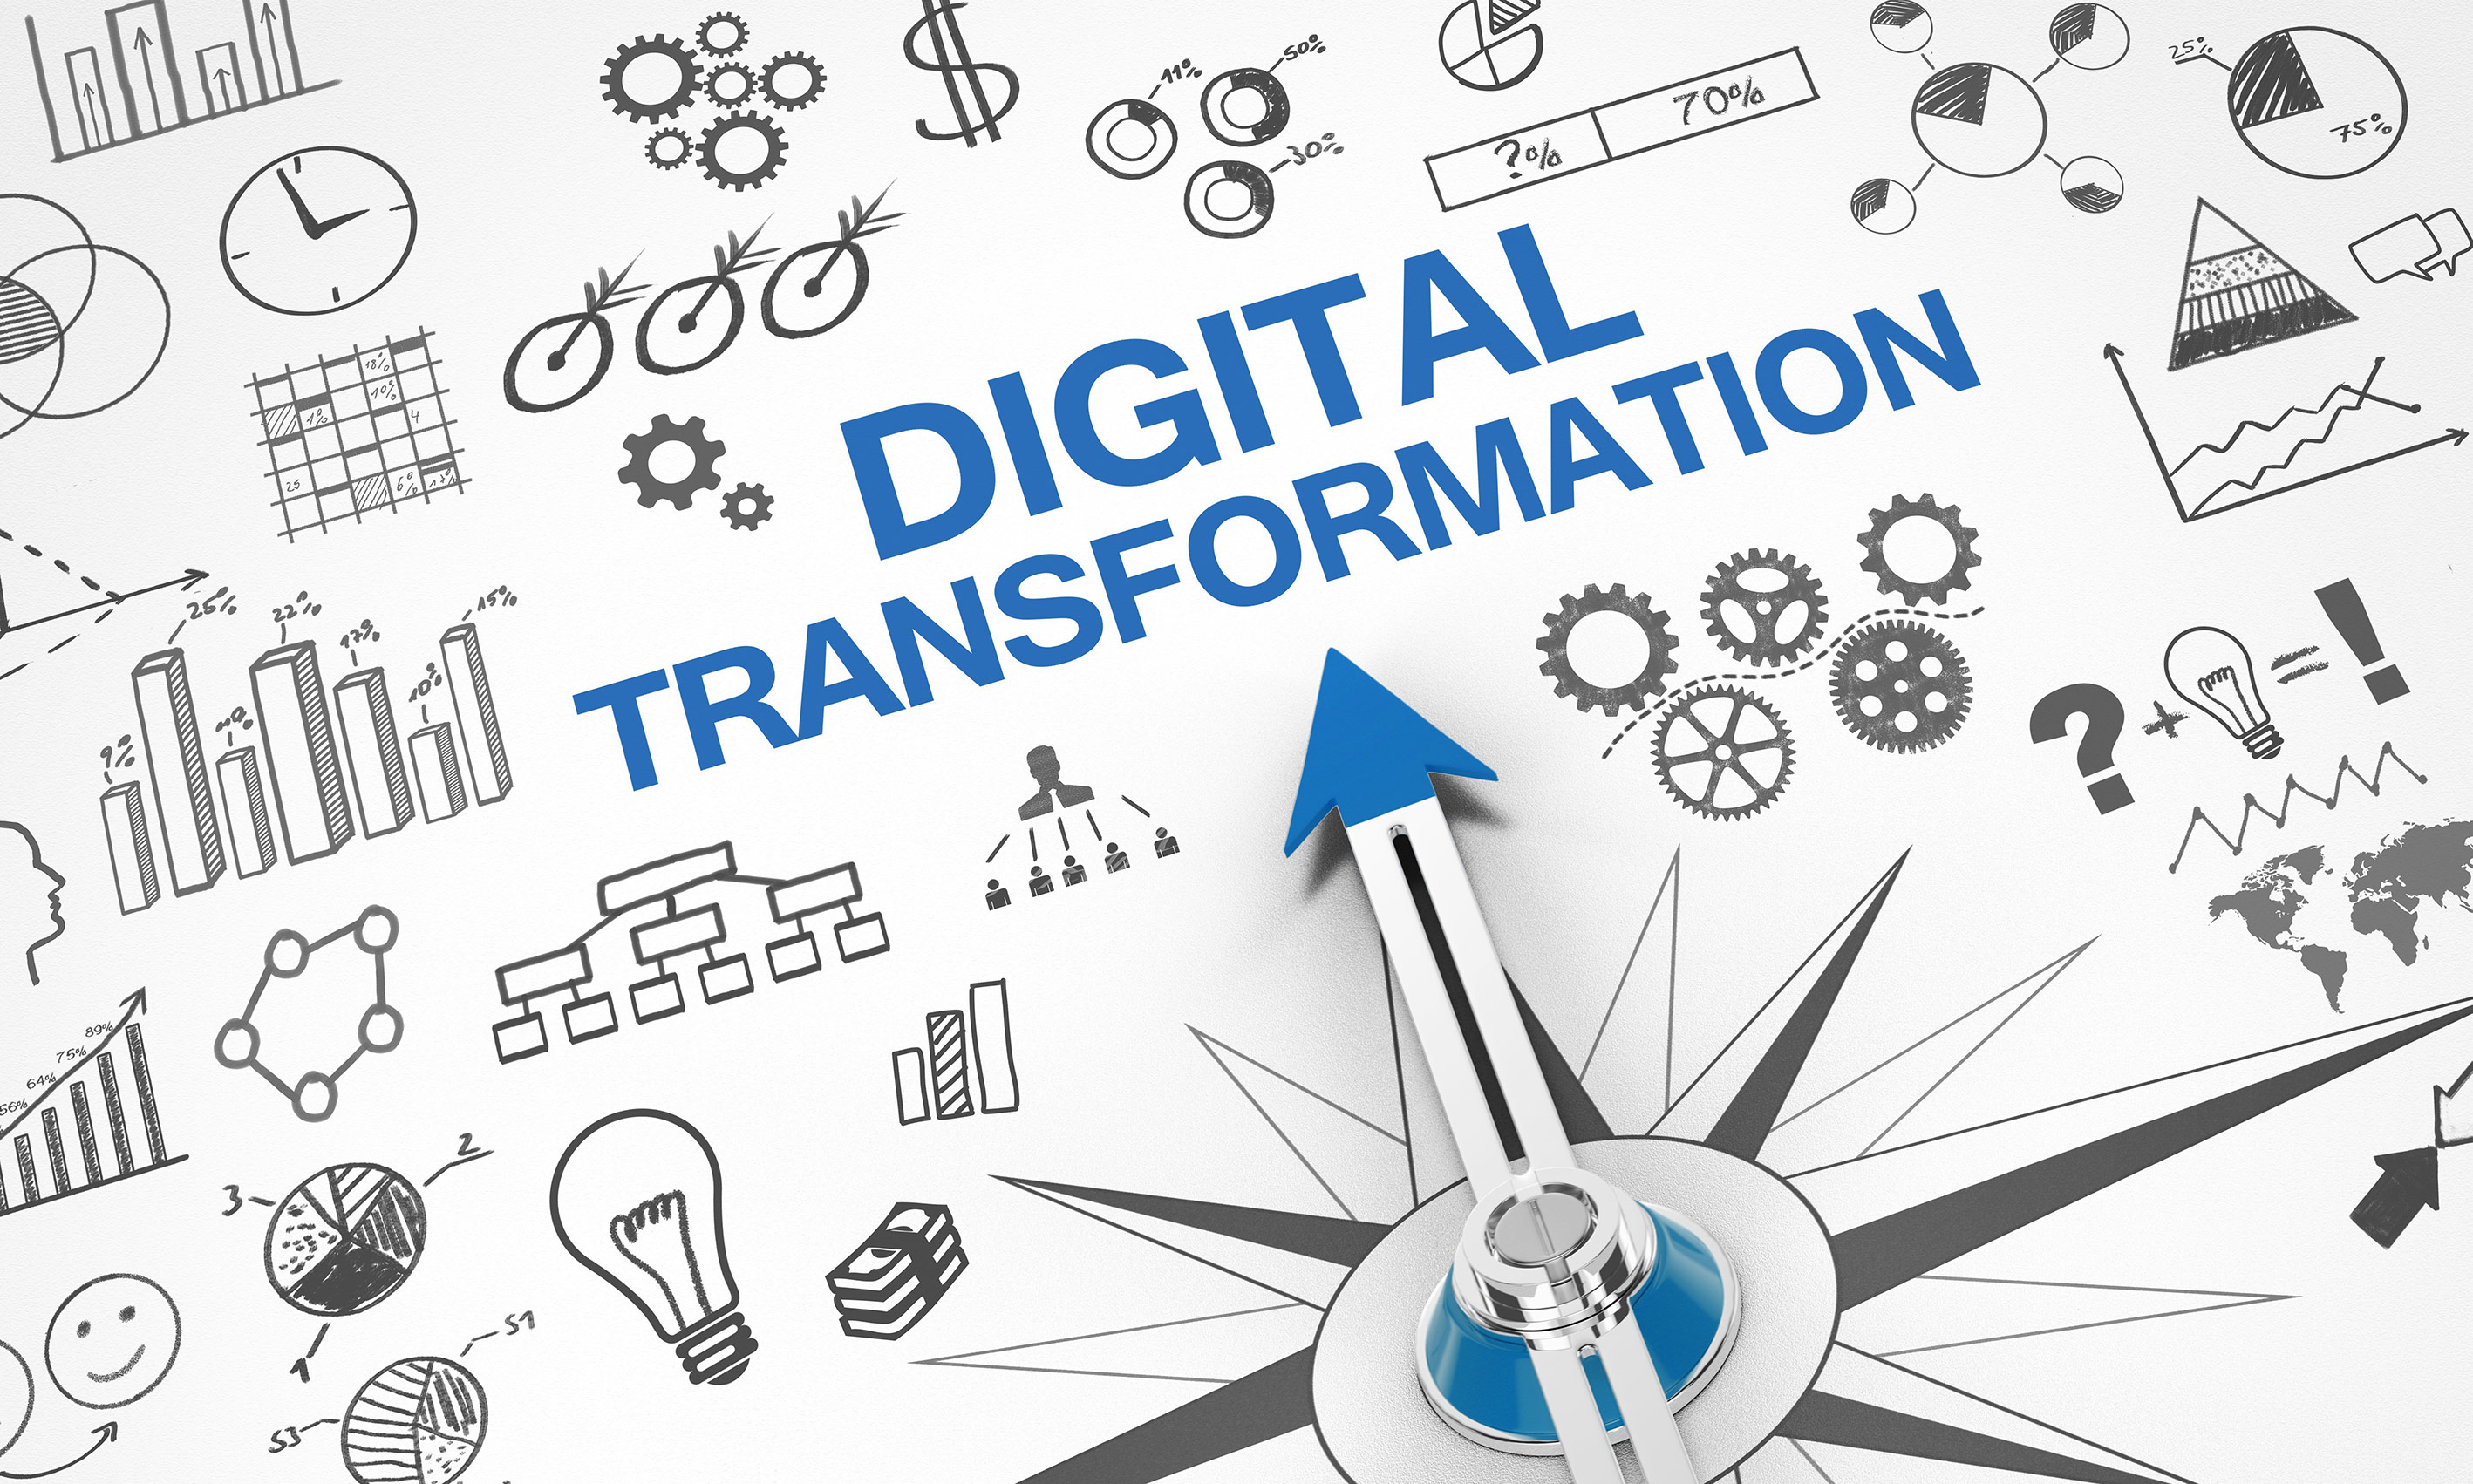 SMEs should focus their efforts on digital transformation in order to survive